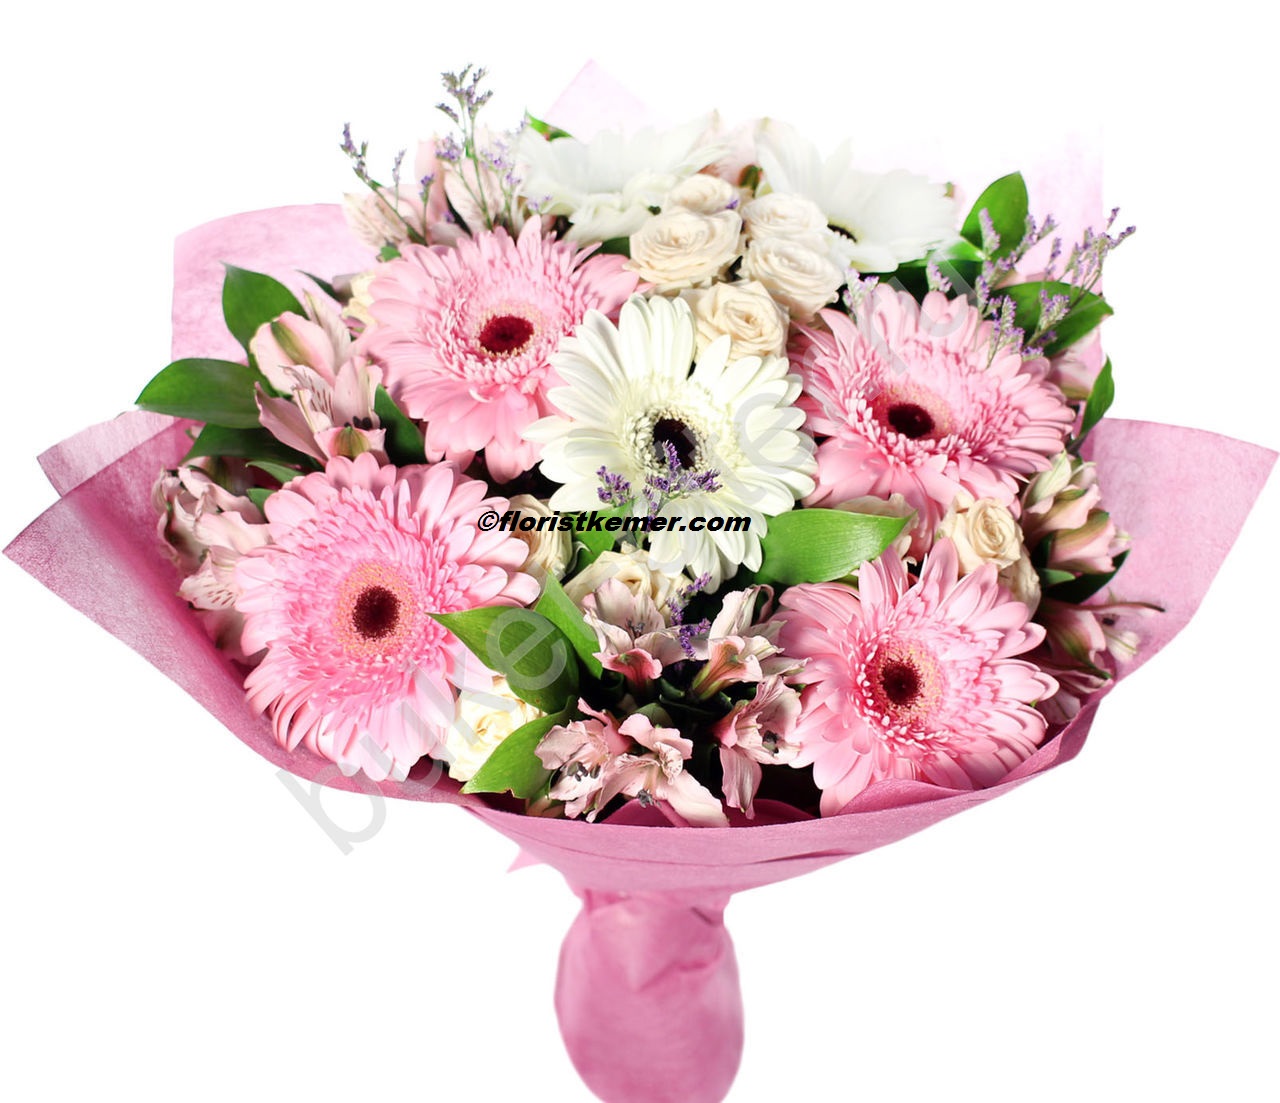  Kemer Flower Delivery Bouquet Pink & White Celbera